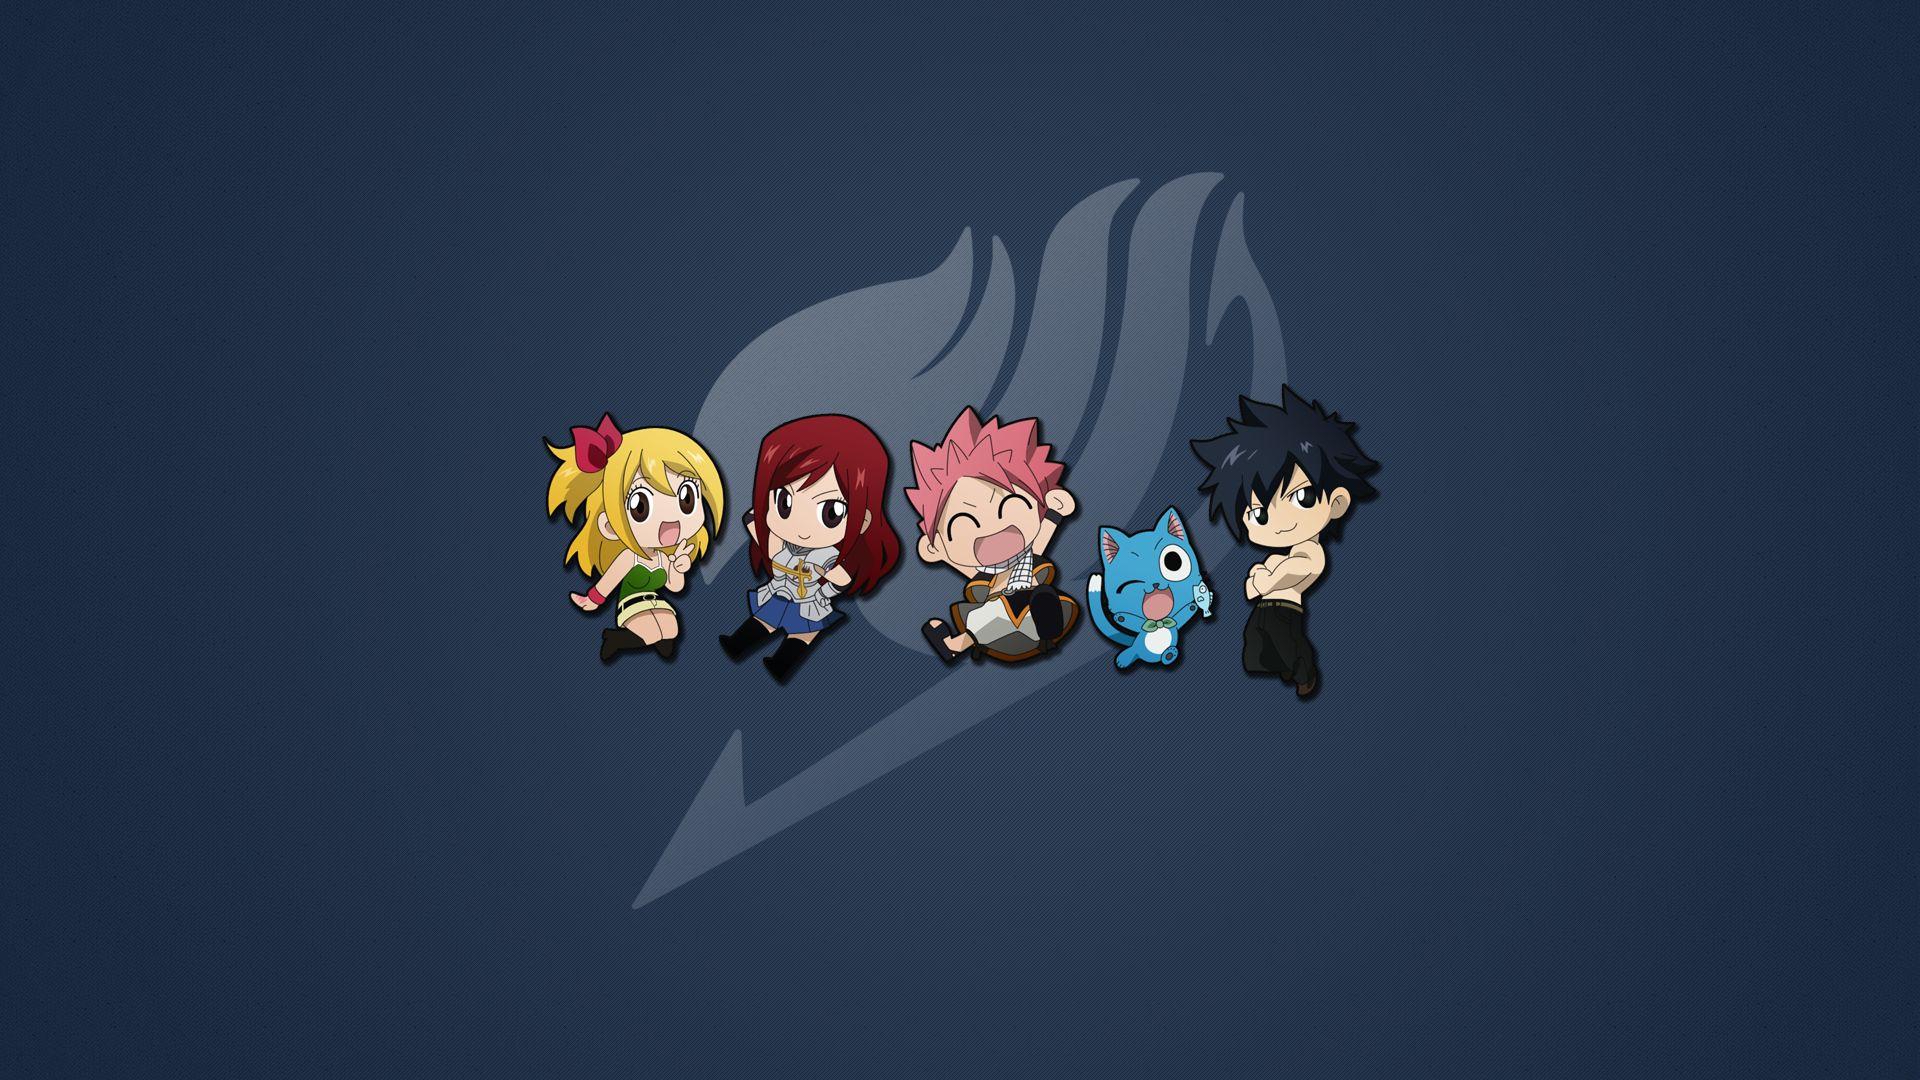 Fairy Tail Wallpapers Chibi - Wallpaper Cave